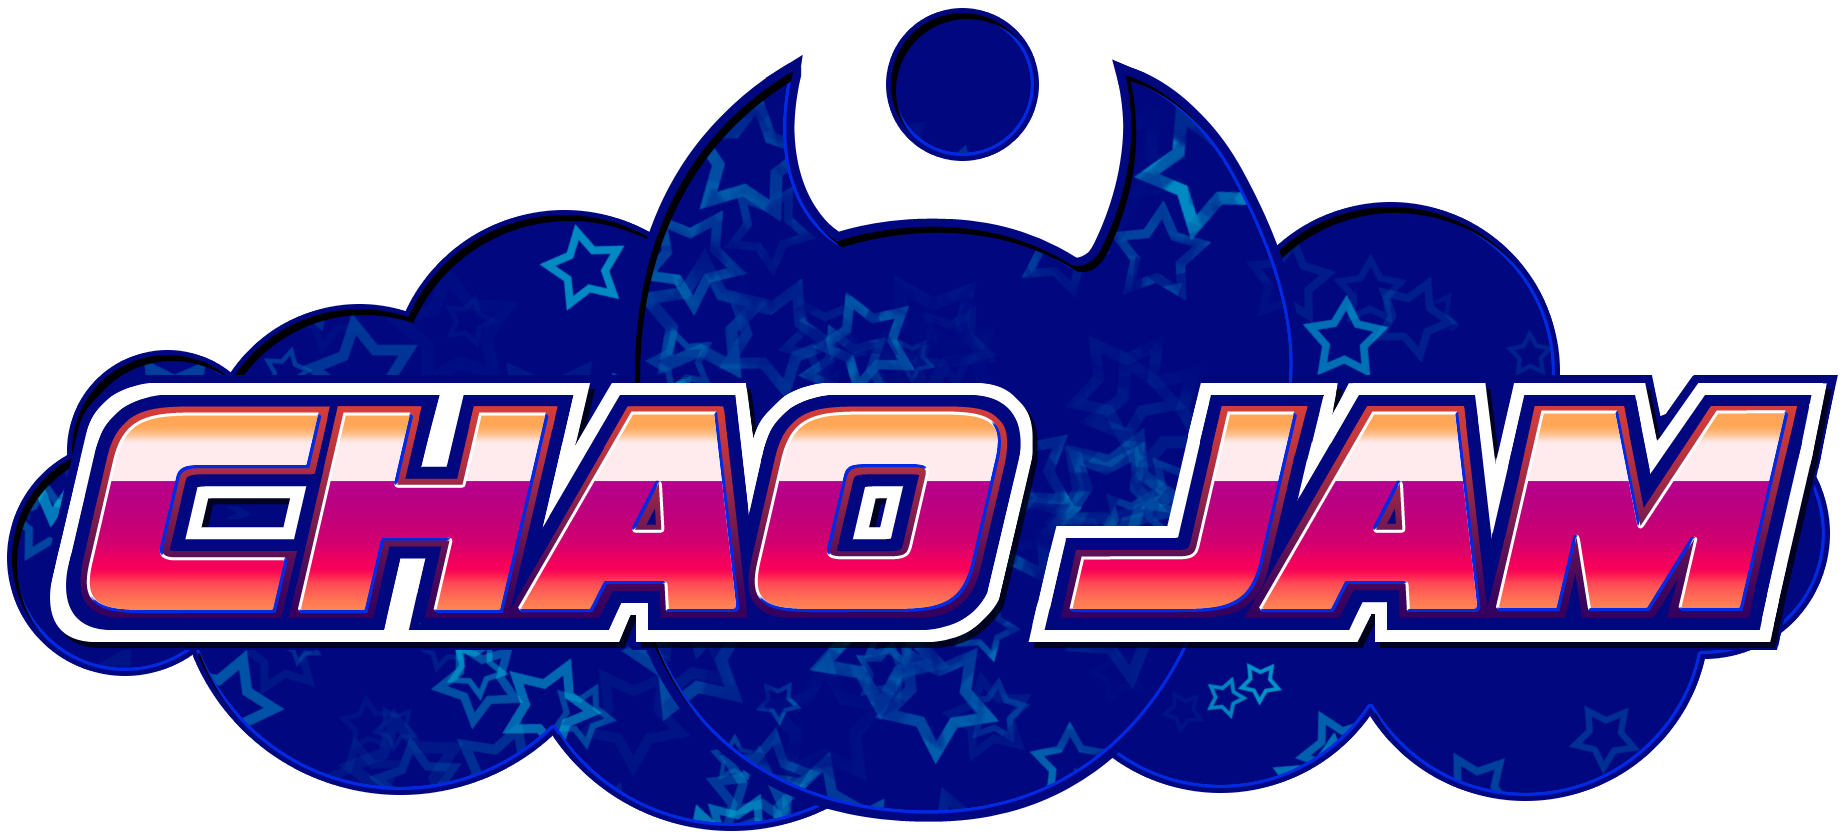 CHAO_JAM_LOGO.png